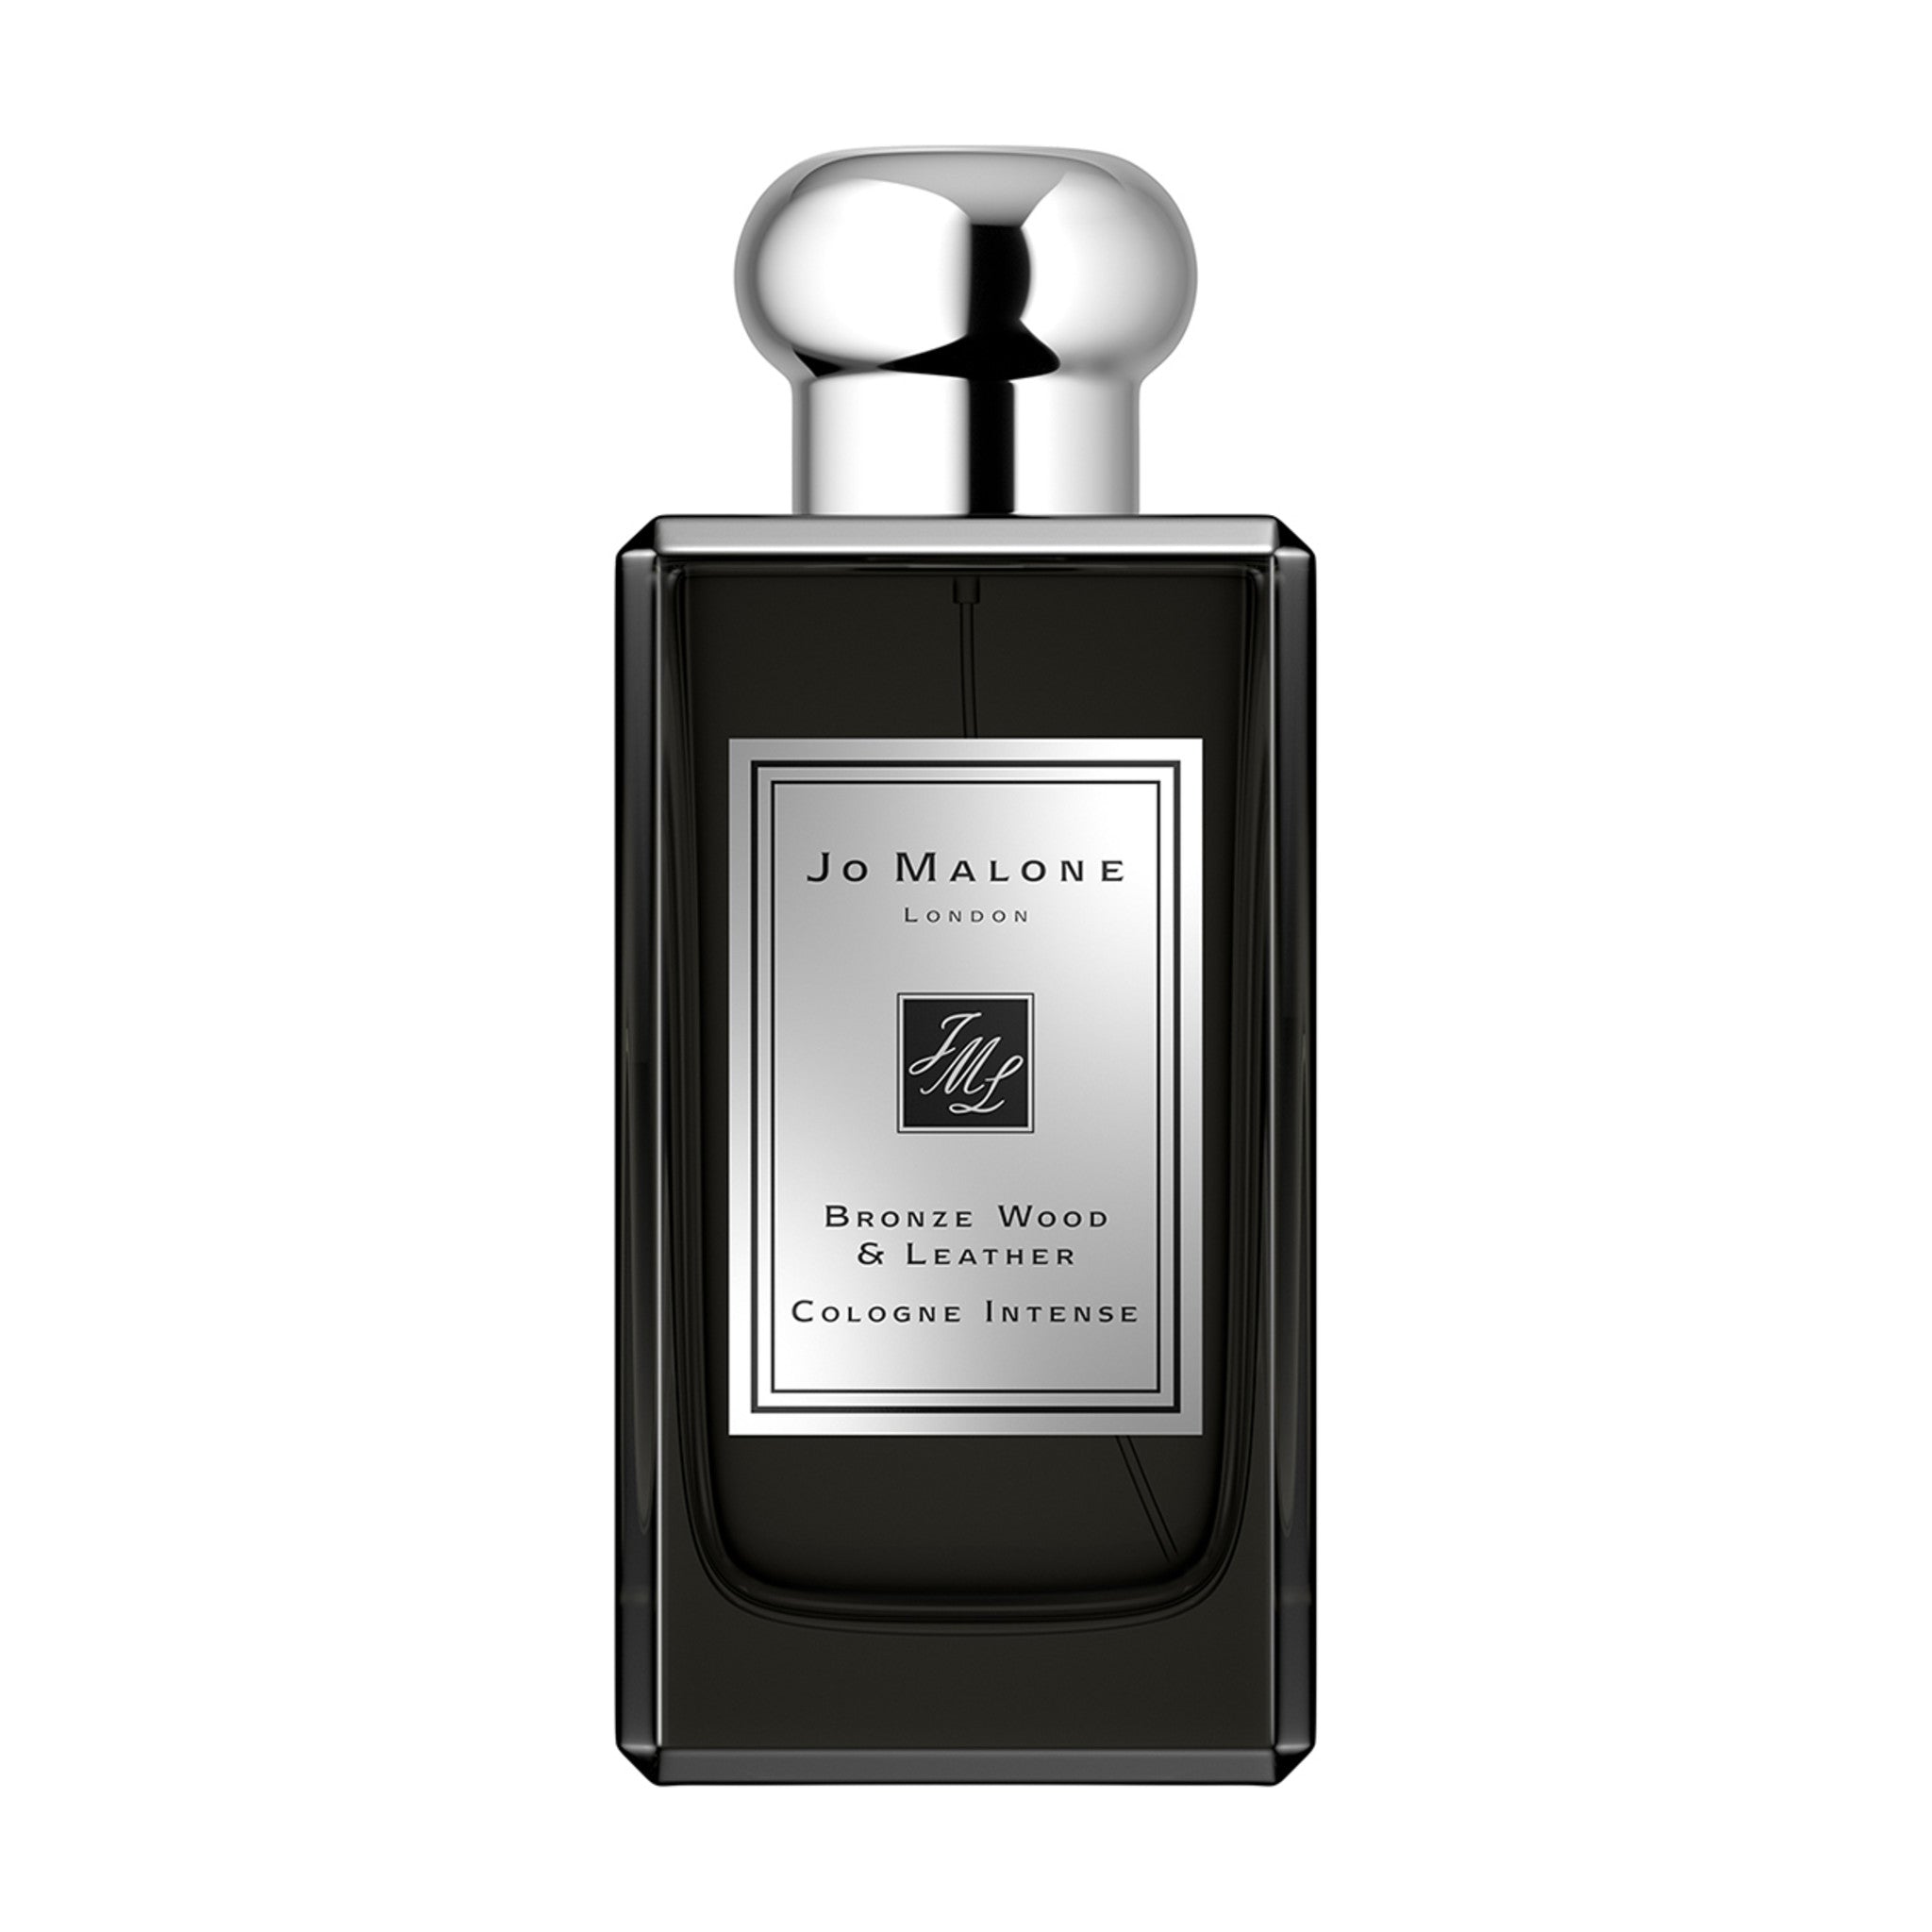 Jo Malone London Bronze Wood and Leather Cologne Intense Size variant: 100 ml main image.